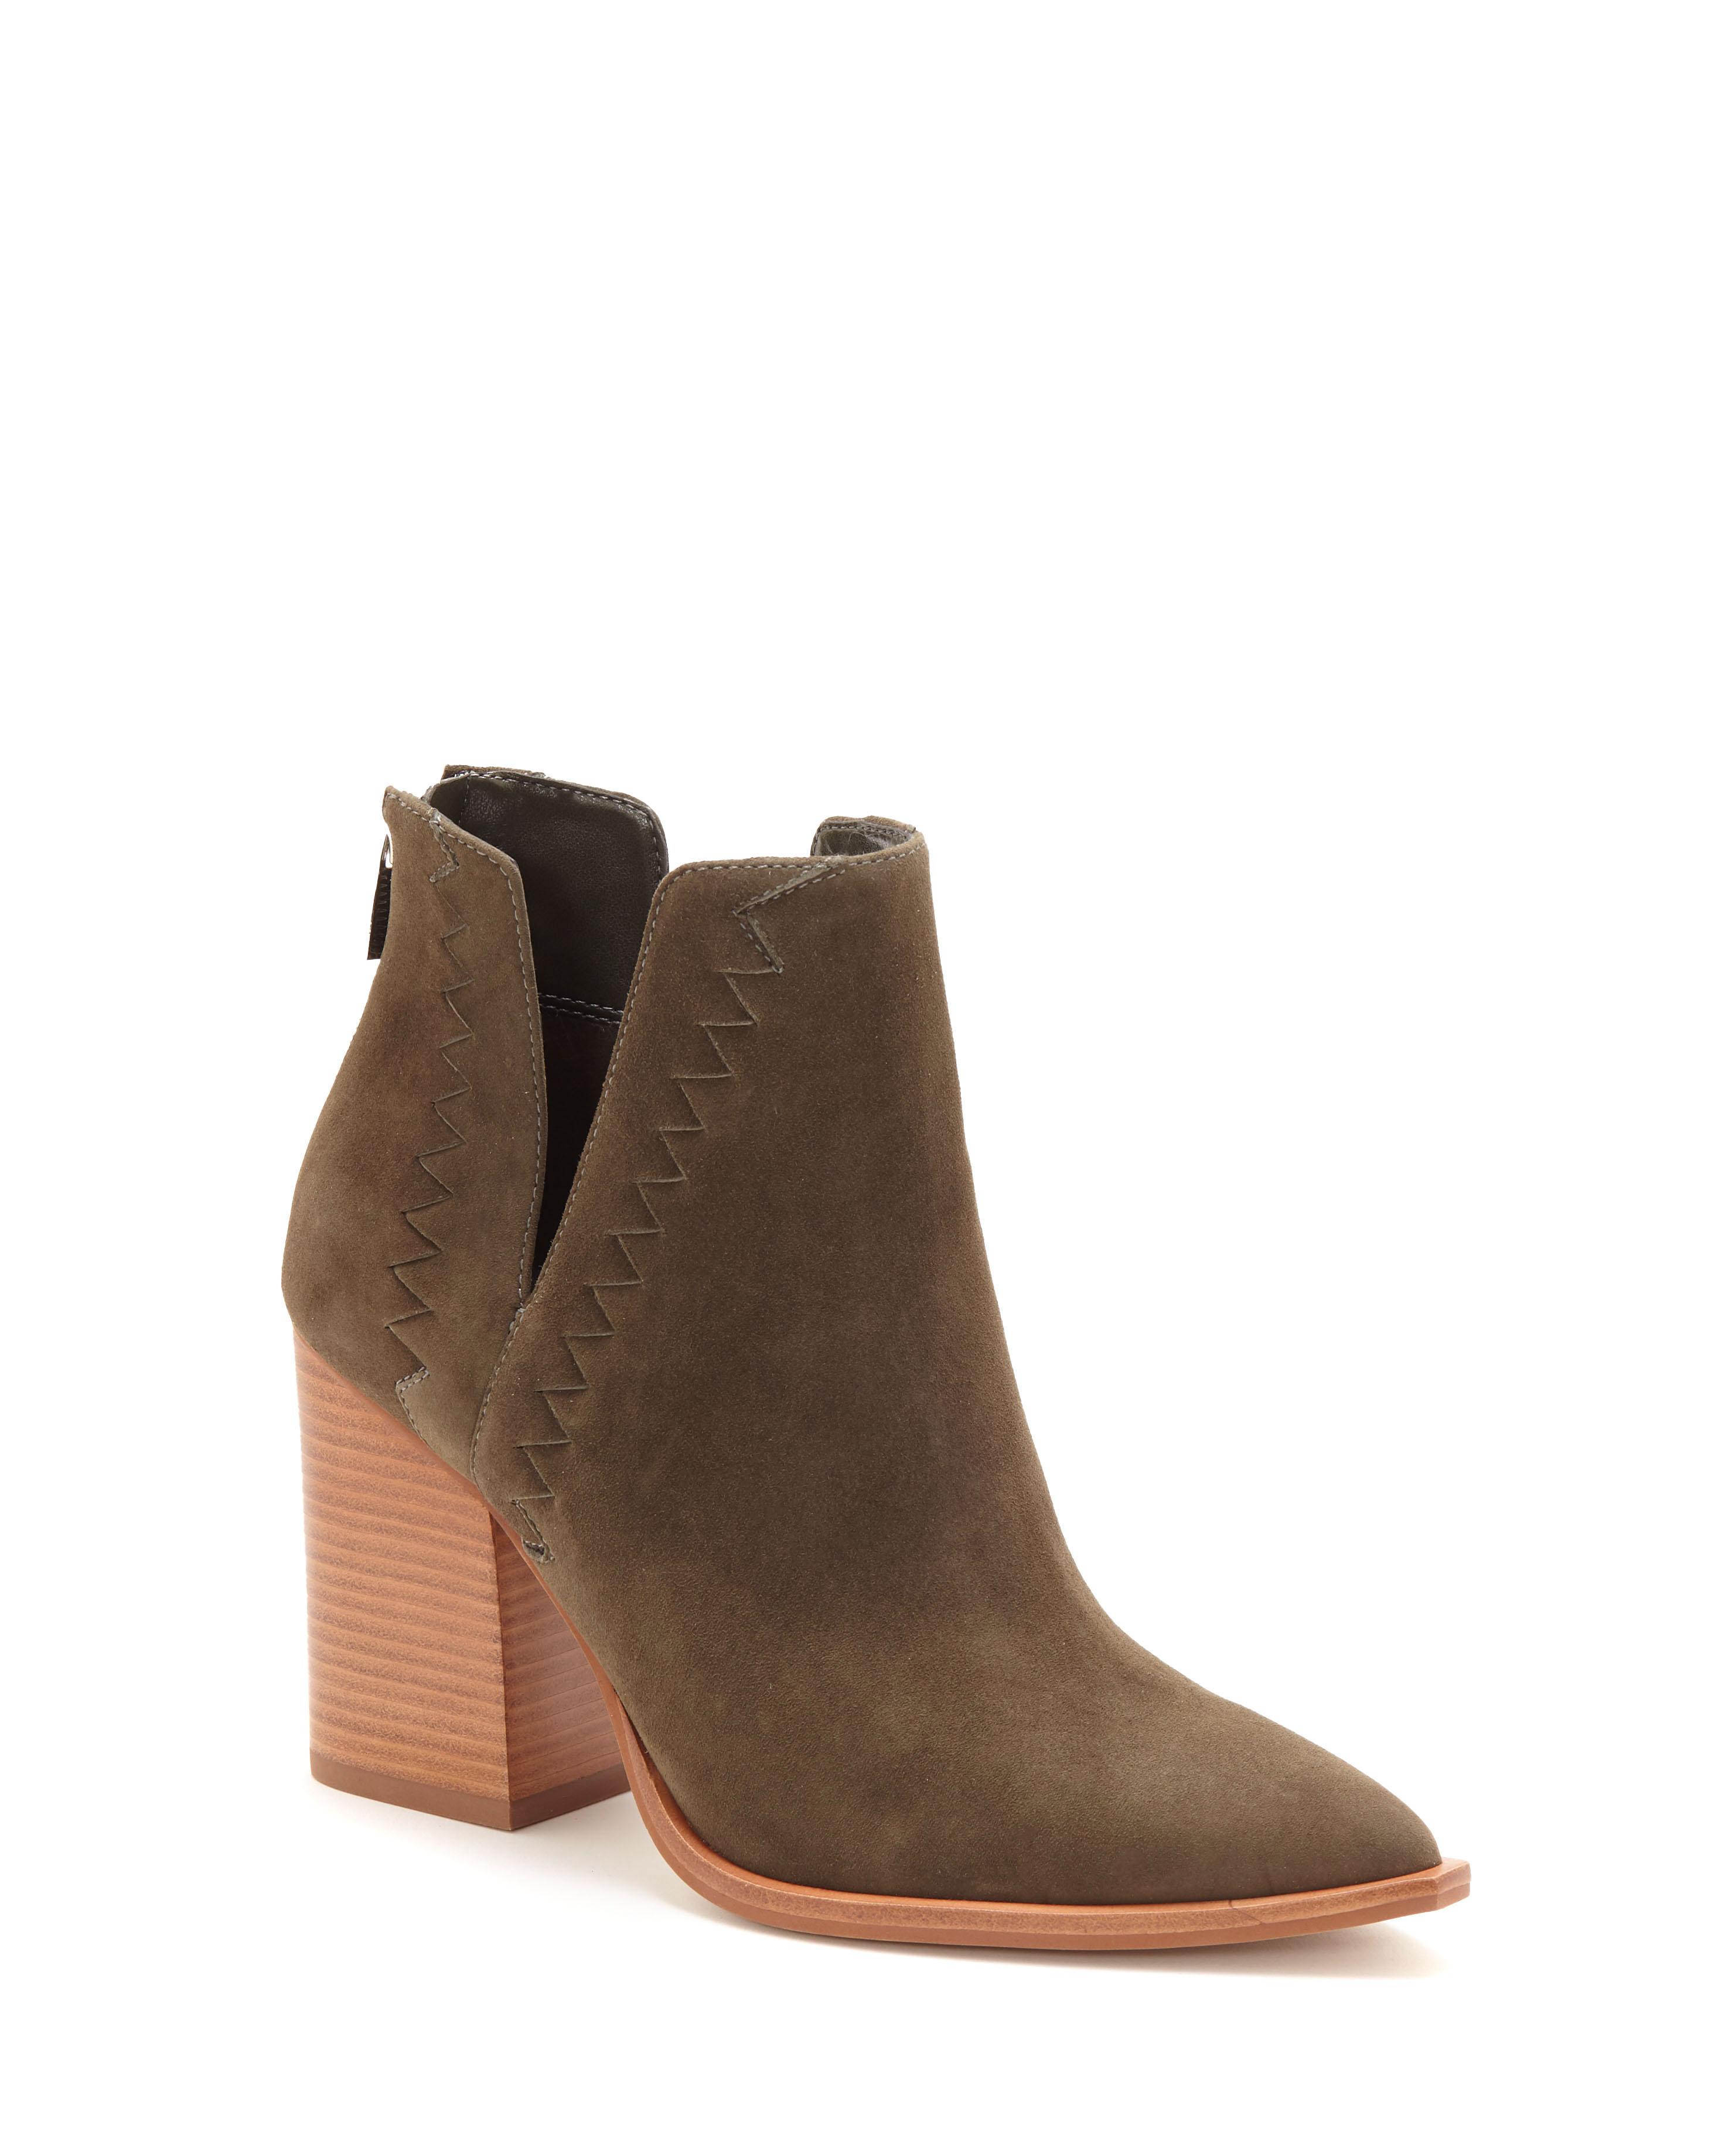 Vince Camuto Suede Genedy Western Bootie in Olive Green (Green) - Lyst